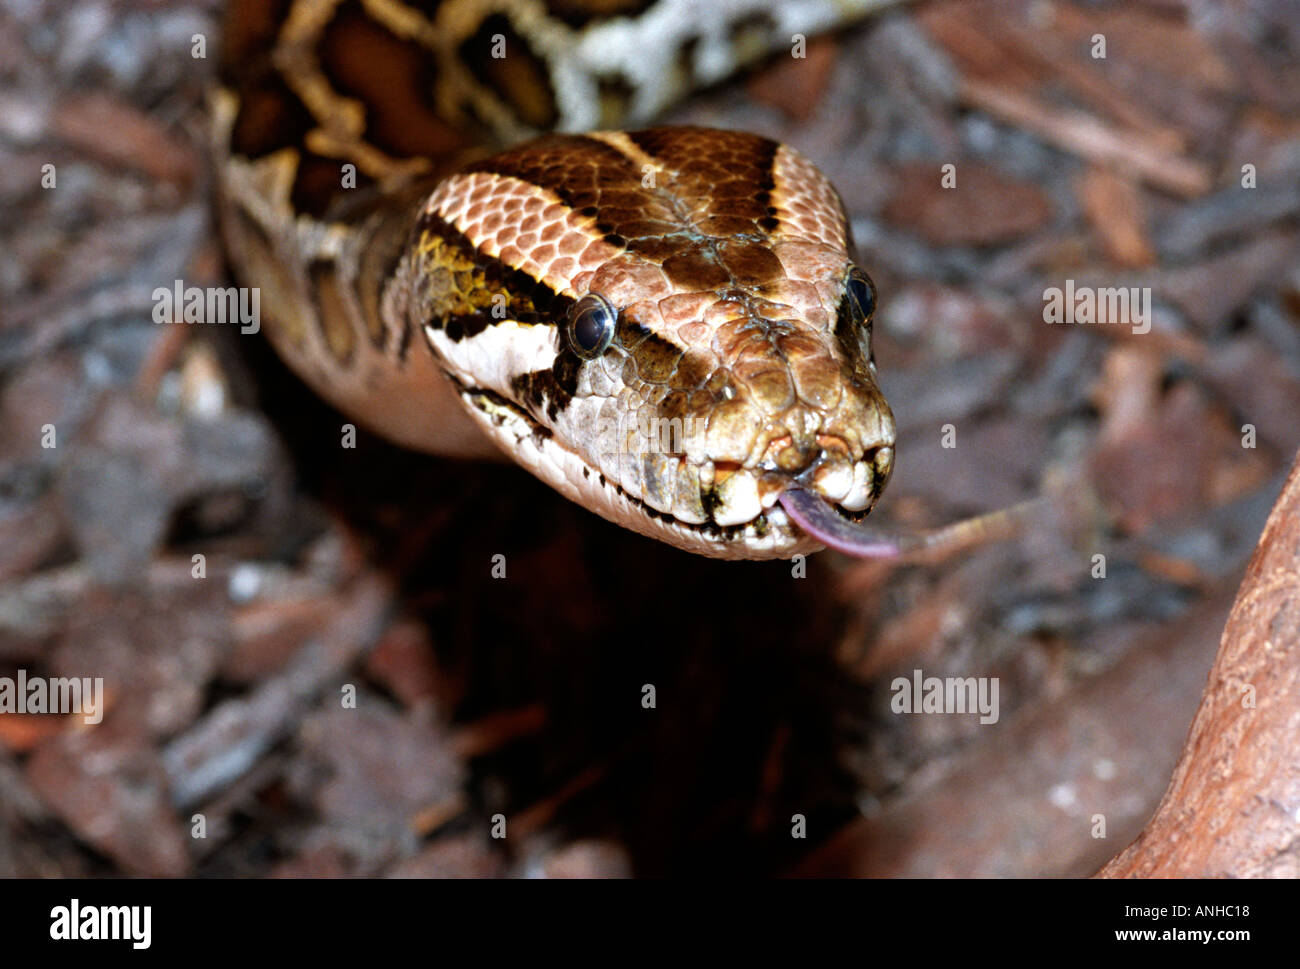 Fearsome looking constricting snake with forked tongue Stock Photo